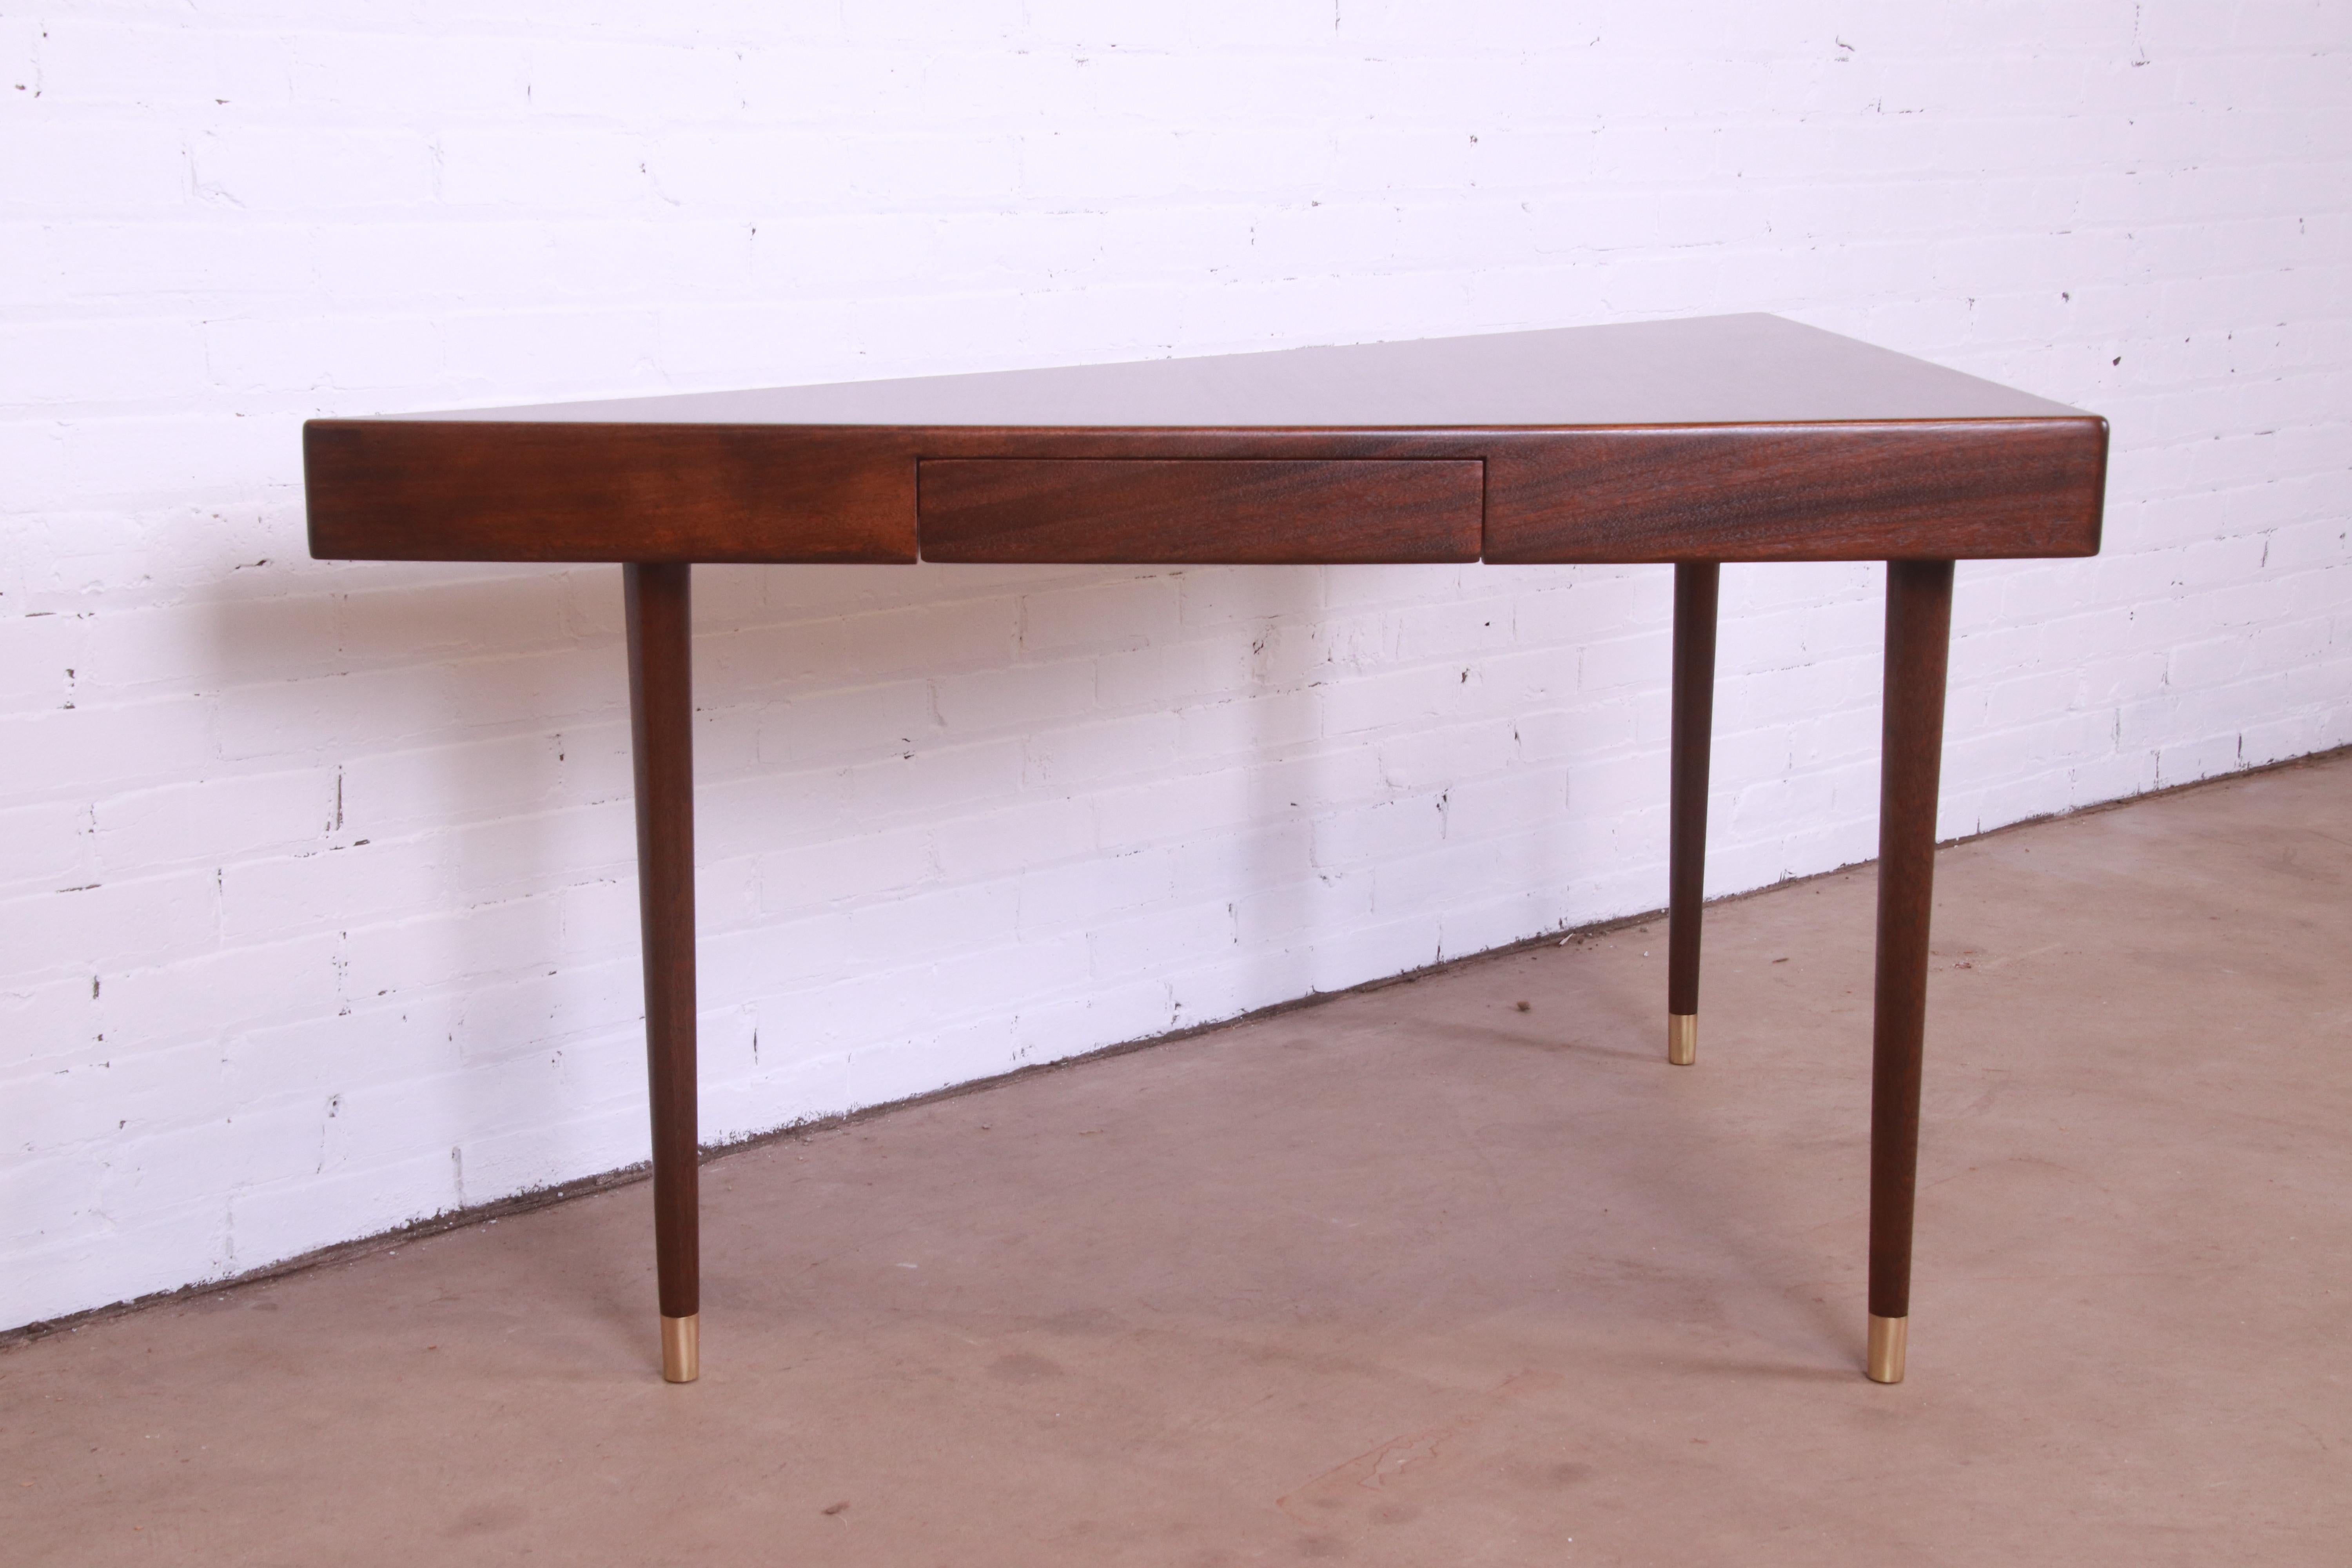 Mid-20th Century Harvey Probber Teak and Brass Triangle Desk or Console Table, Newly Refinished For Sale